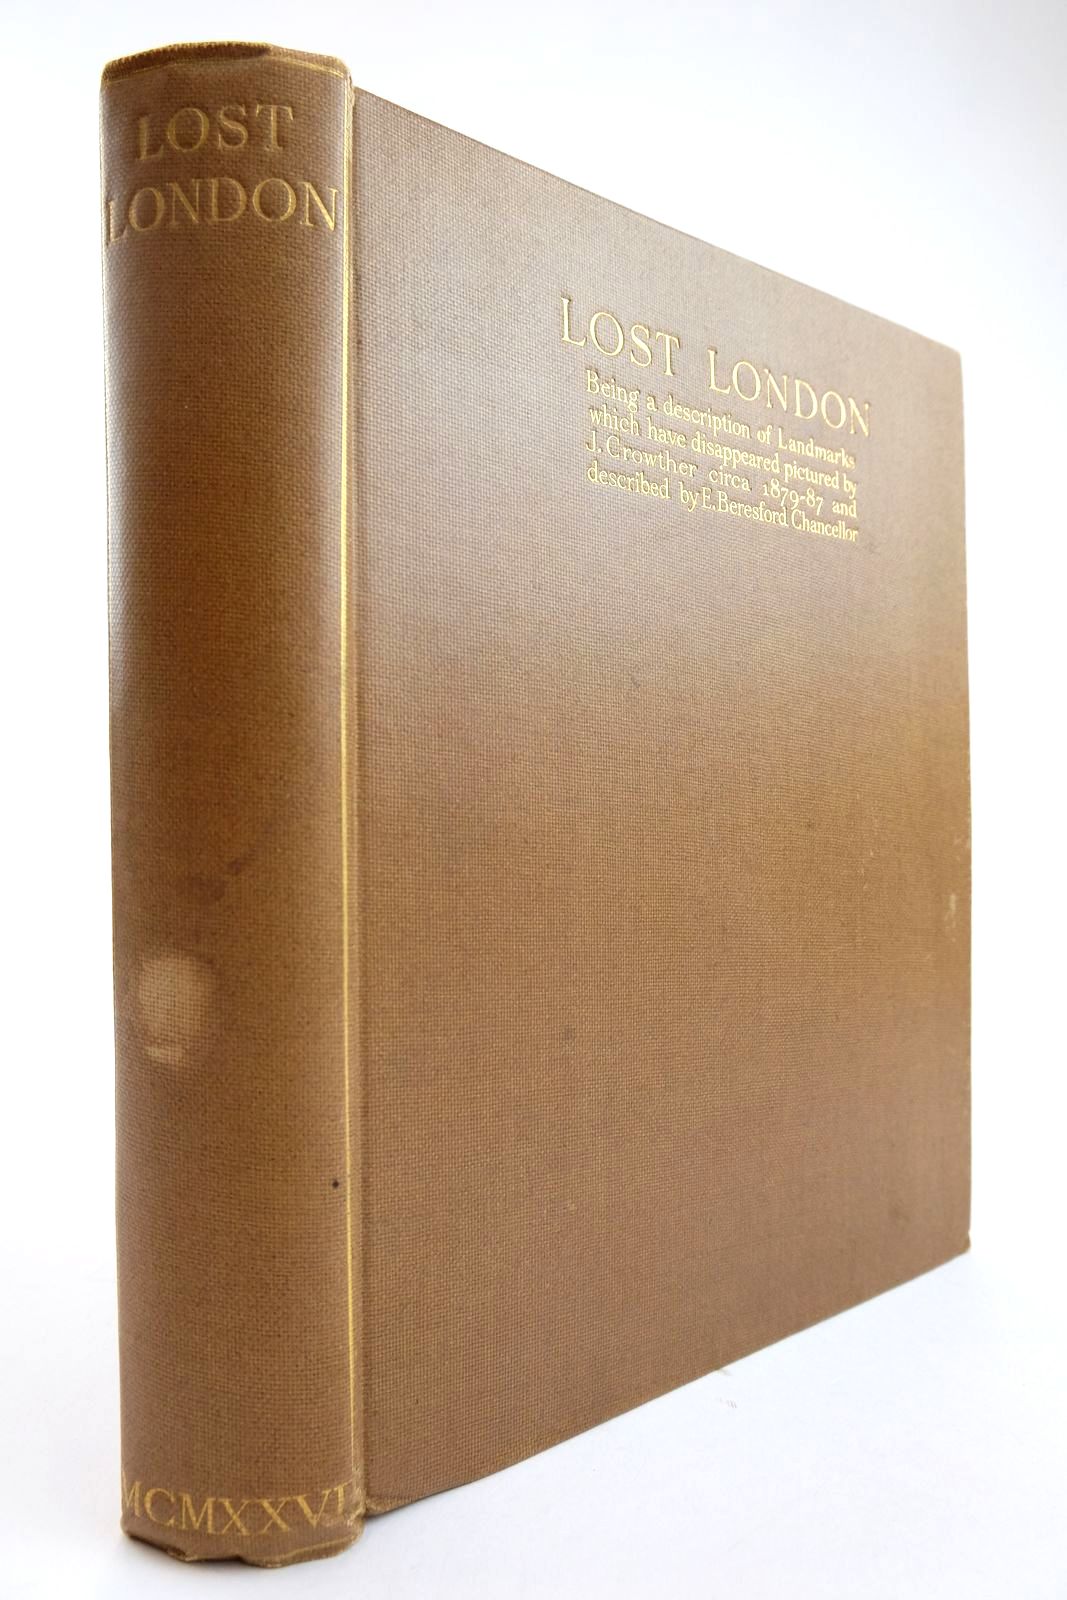 Photo of LOST LONDON written by Chancellor, E. Beresford illustrated by Crowther, J. published by Constable and Company Ltd. (STOCK CODE: 2134139)  for sale by Stella & Rose's Books